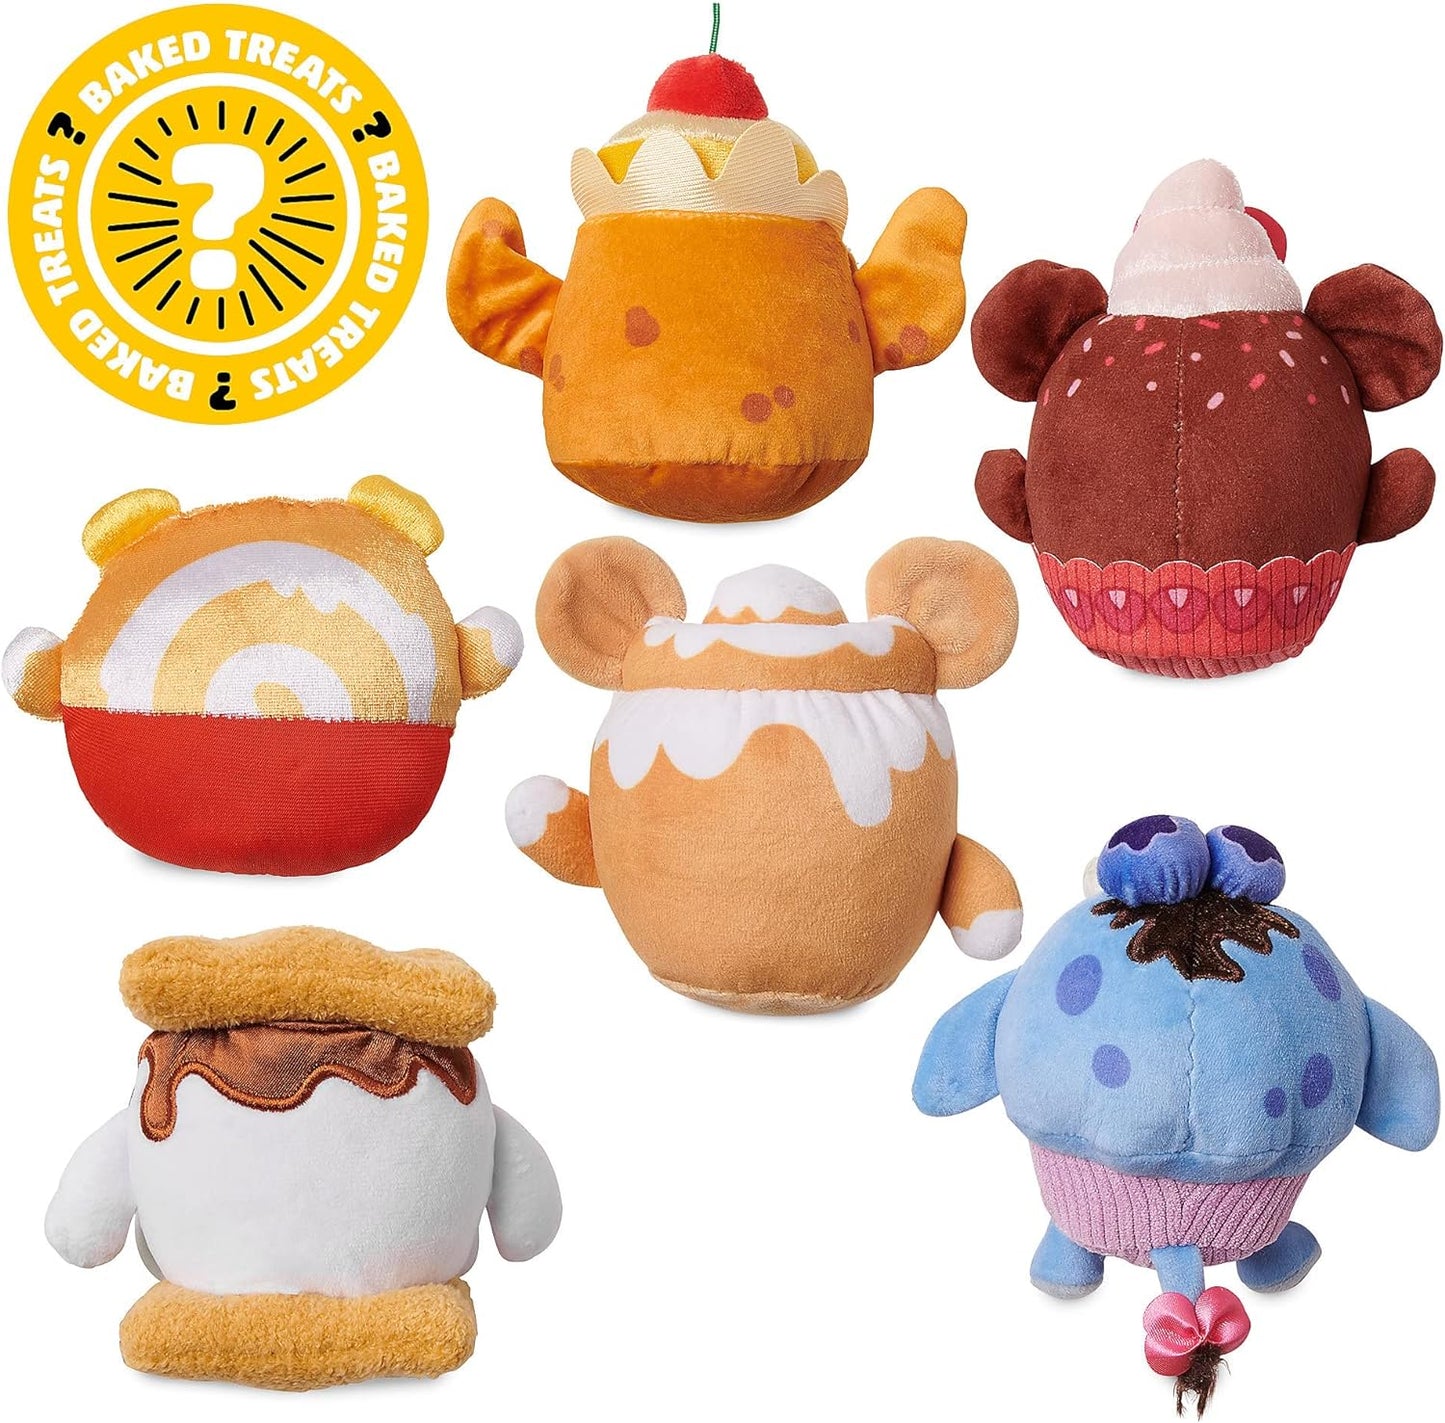 Baked Treats Disney Munchlings Mystery Scented Plush – Micro 4 3/4 Inches